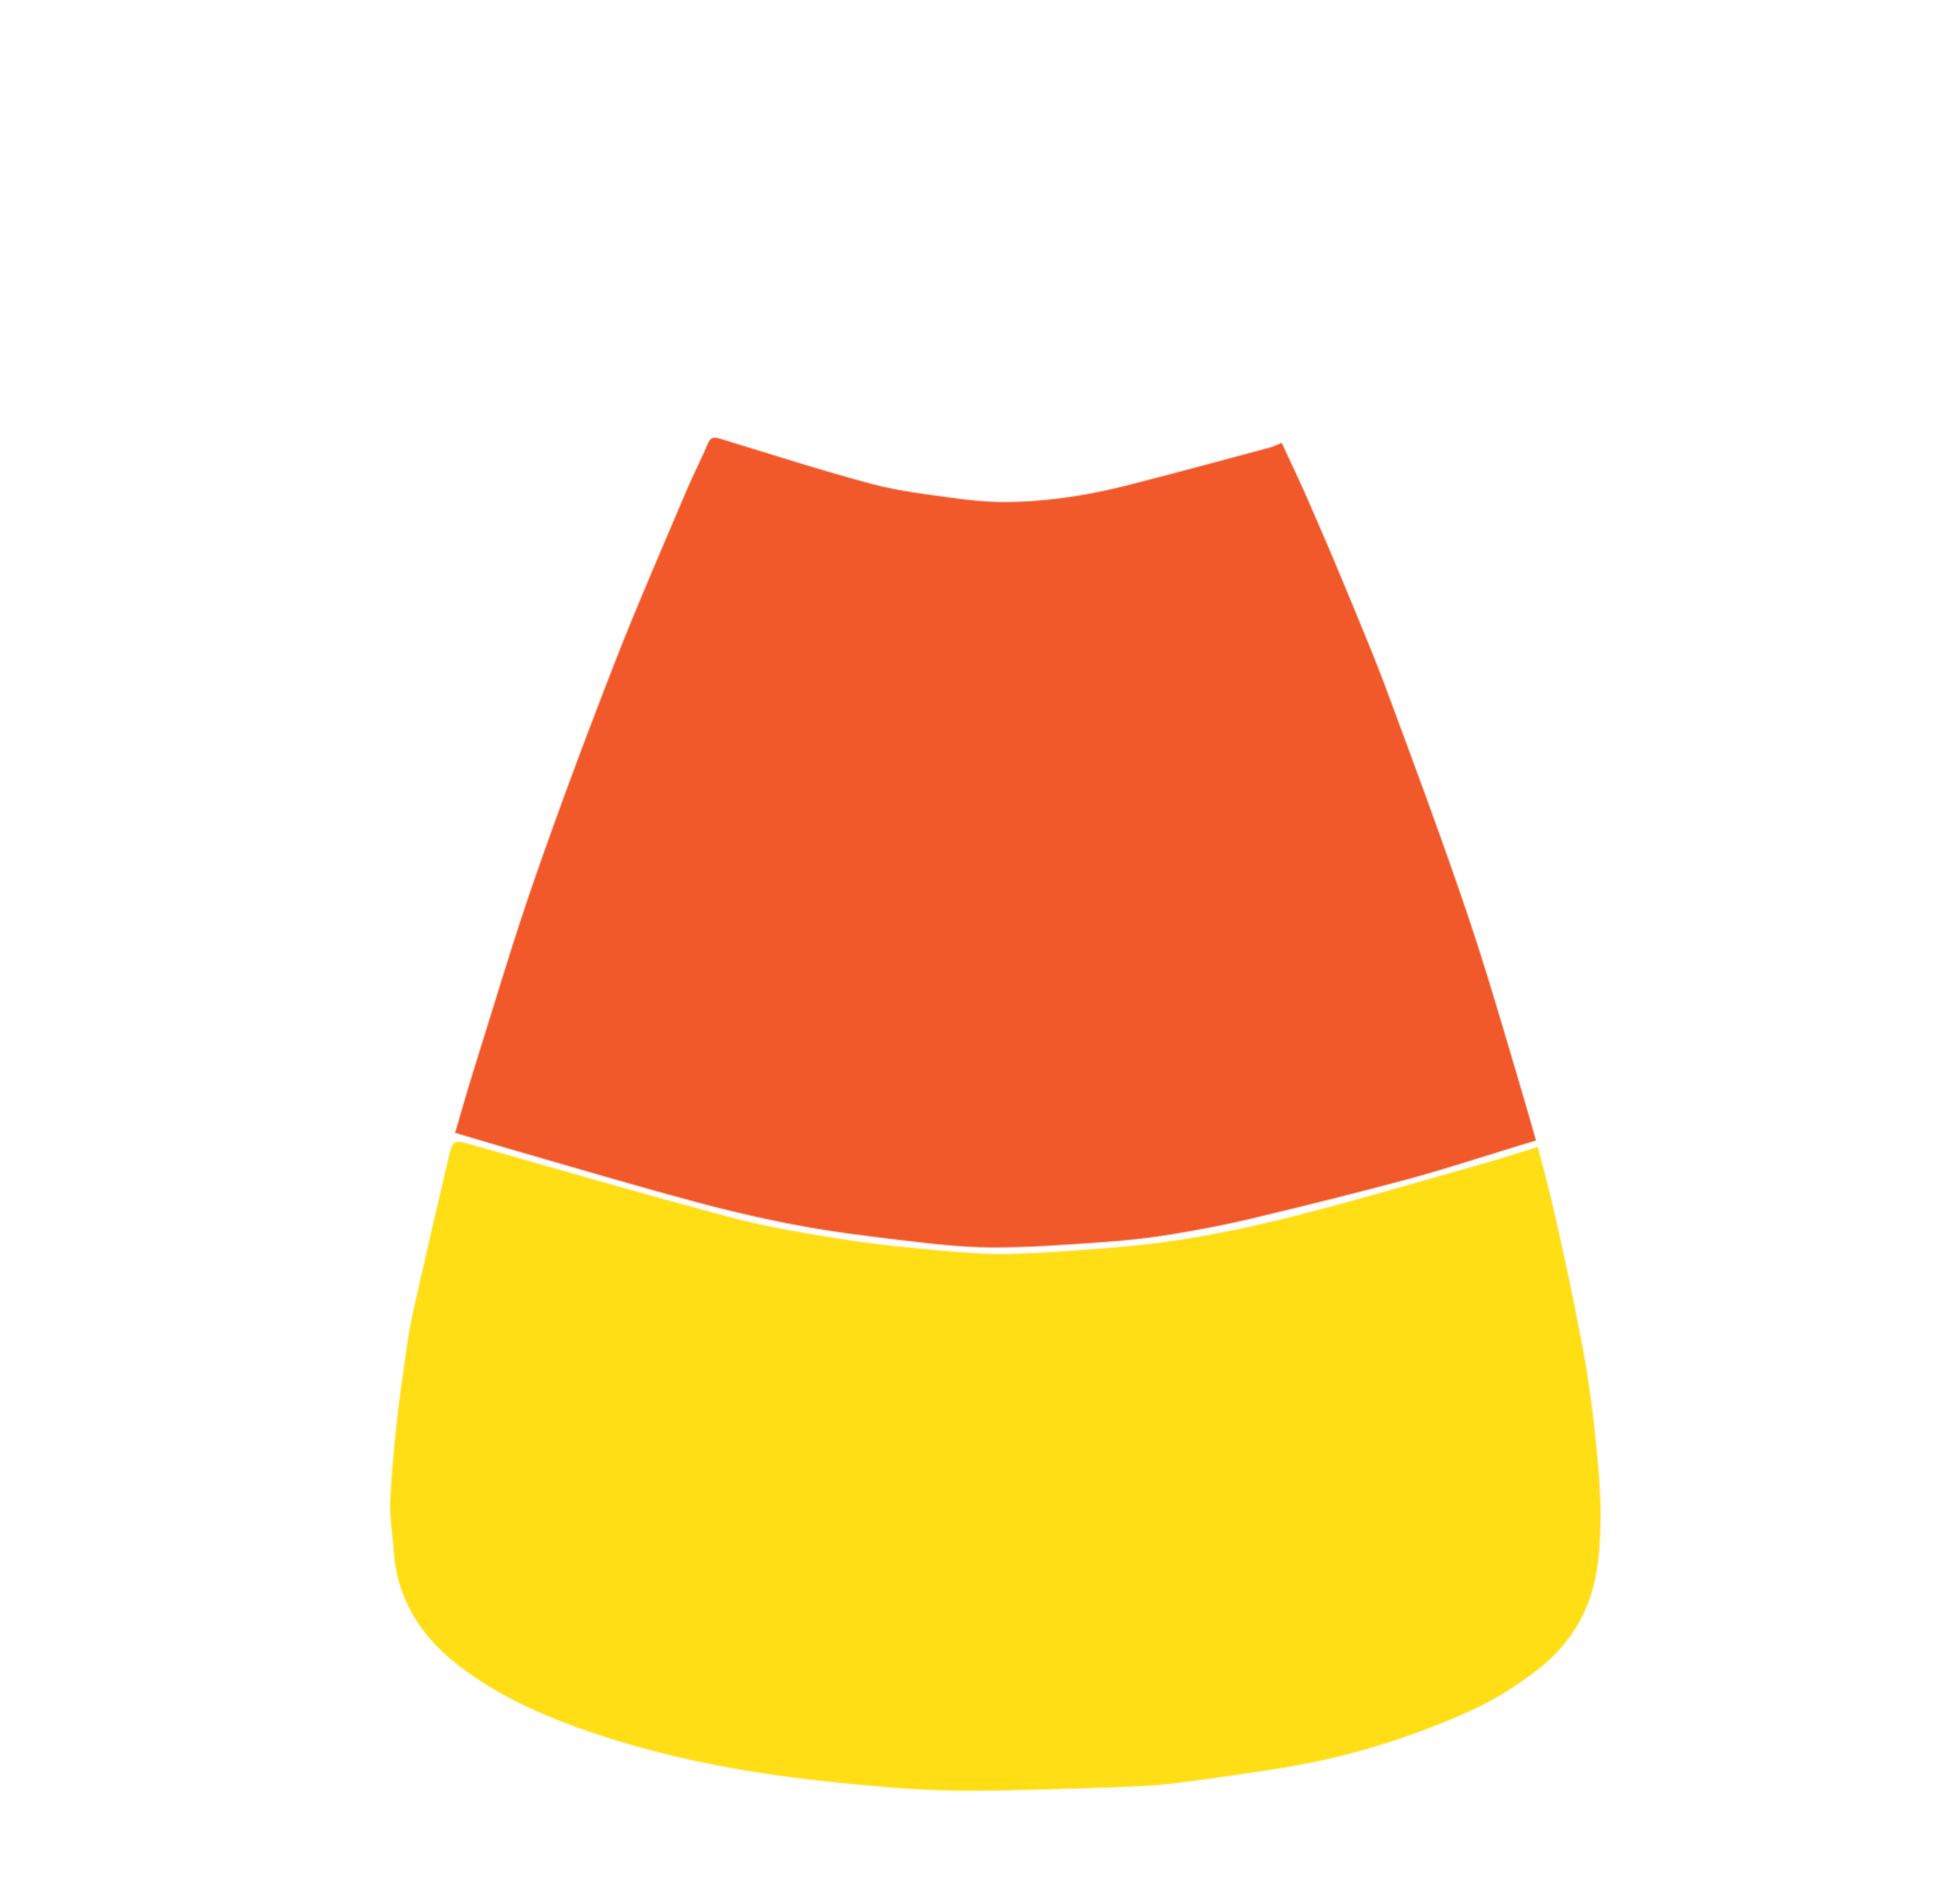 Candy corn candyrn border candyrn clipart 2 wikiclipart